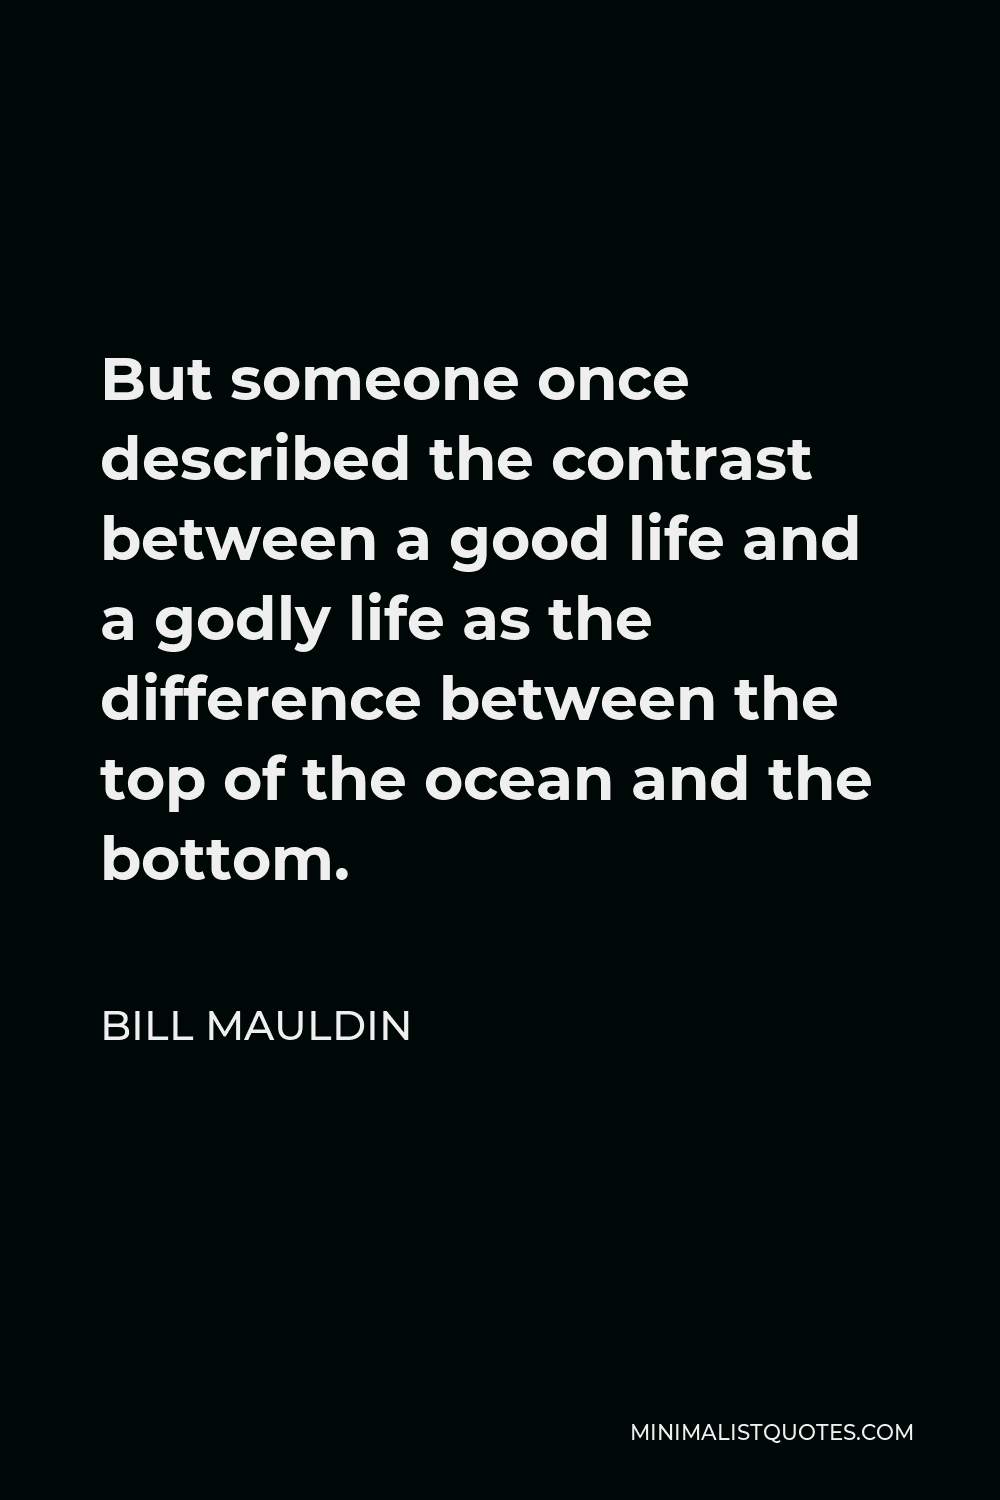 Bill Mauldin Quote - But someone once described the contrast between a good life and a godly life as the difference between the top of the ocean and the bottom.